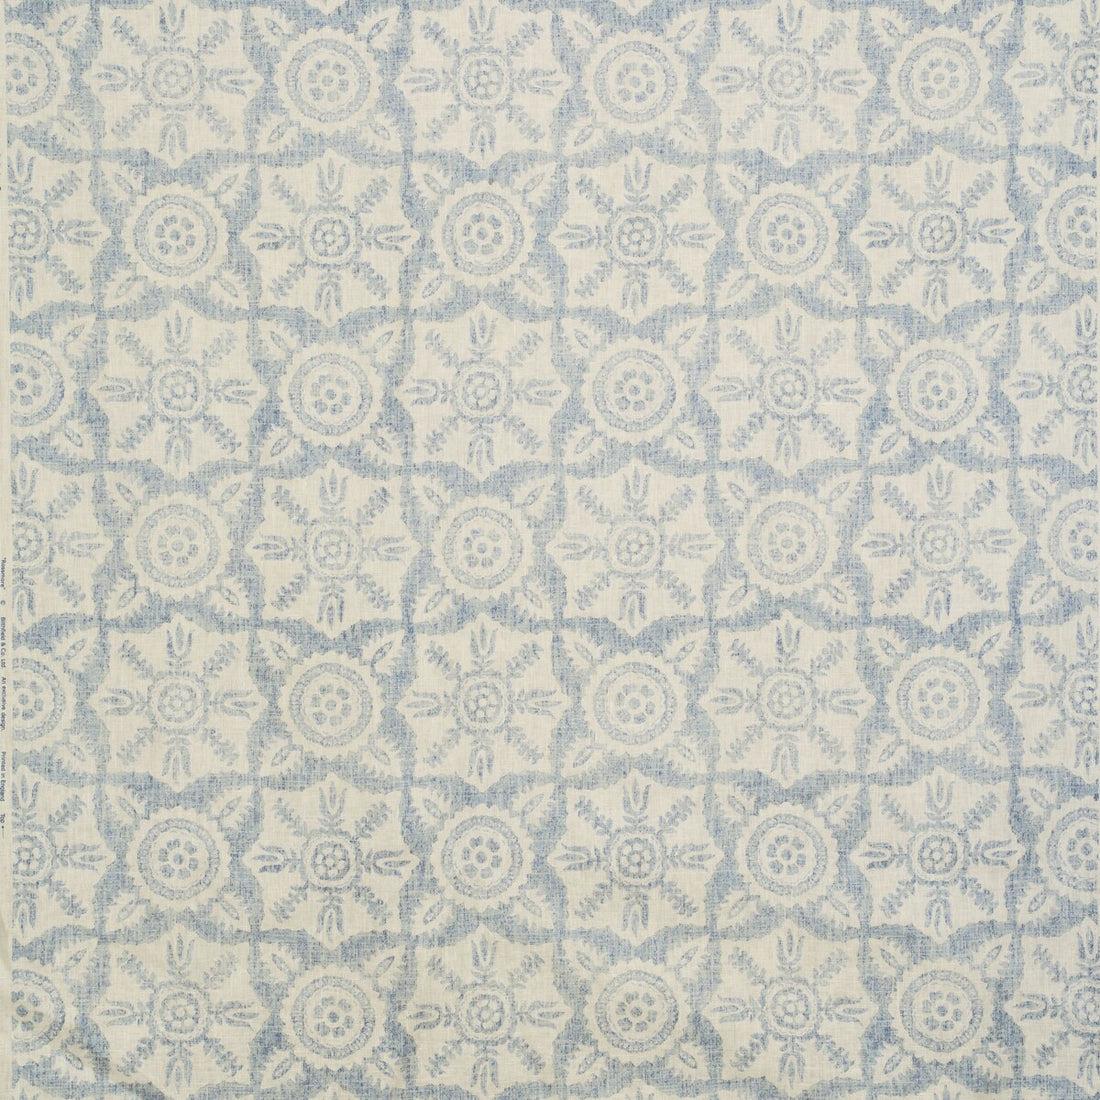 Rossmore II fabric in aqua color - pattern BFC-3647.13.0 - by Lee Jofa in the Blithfield collection